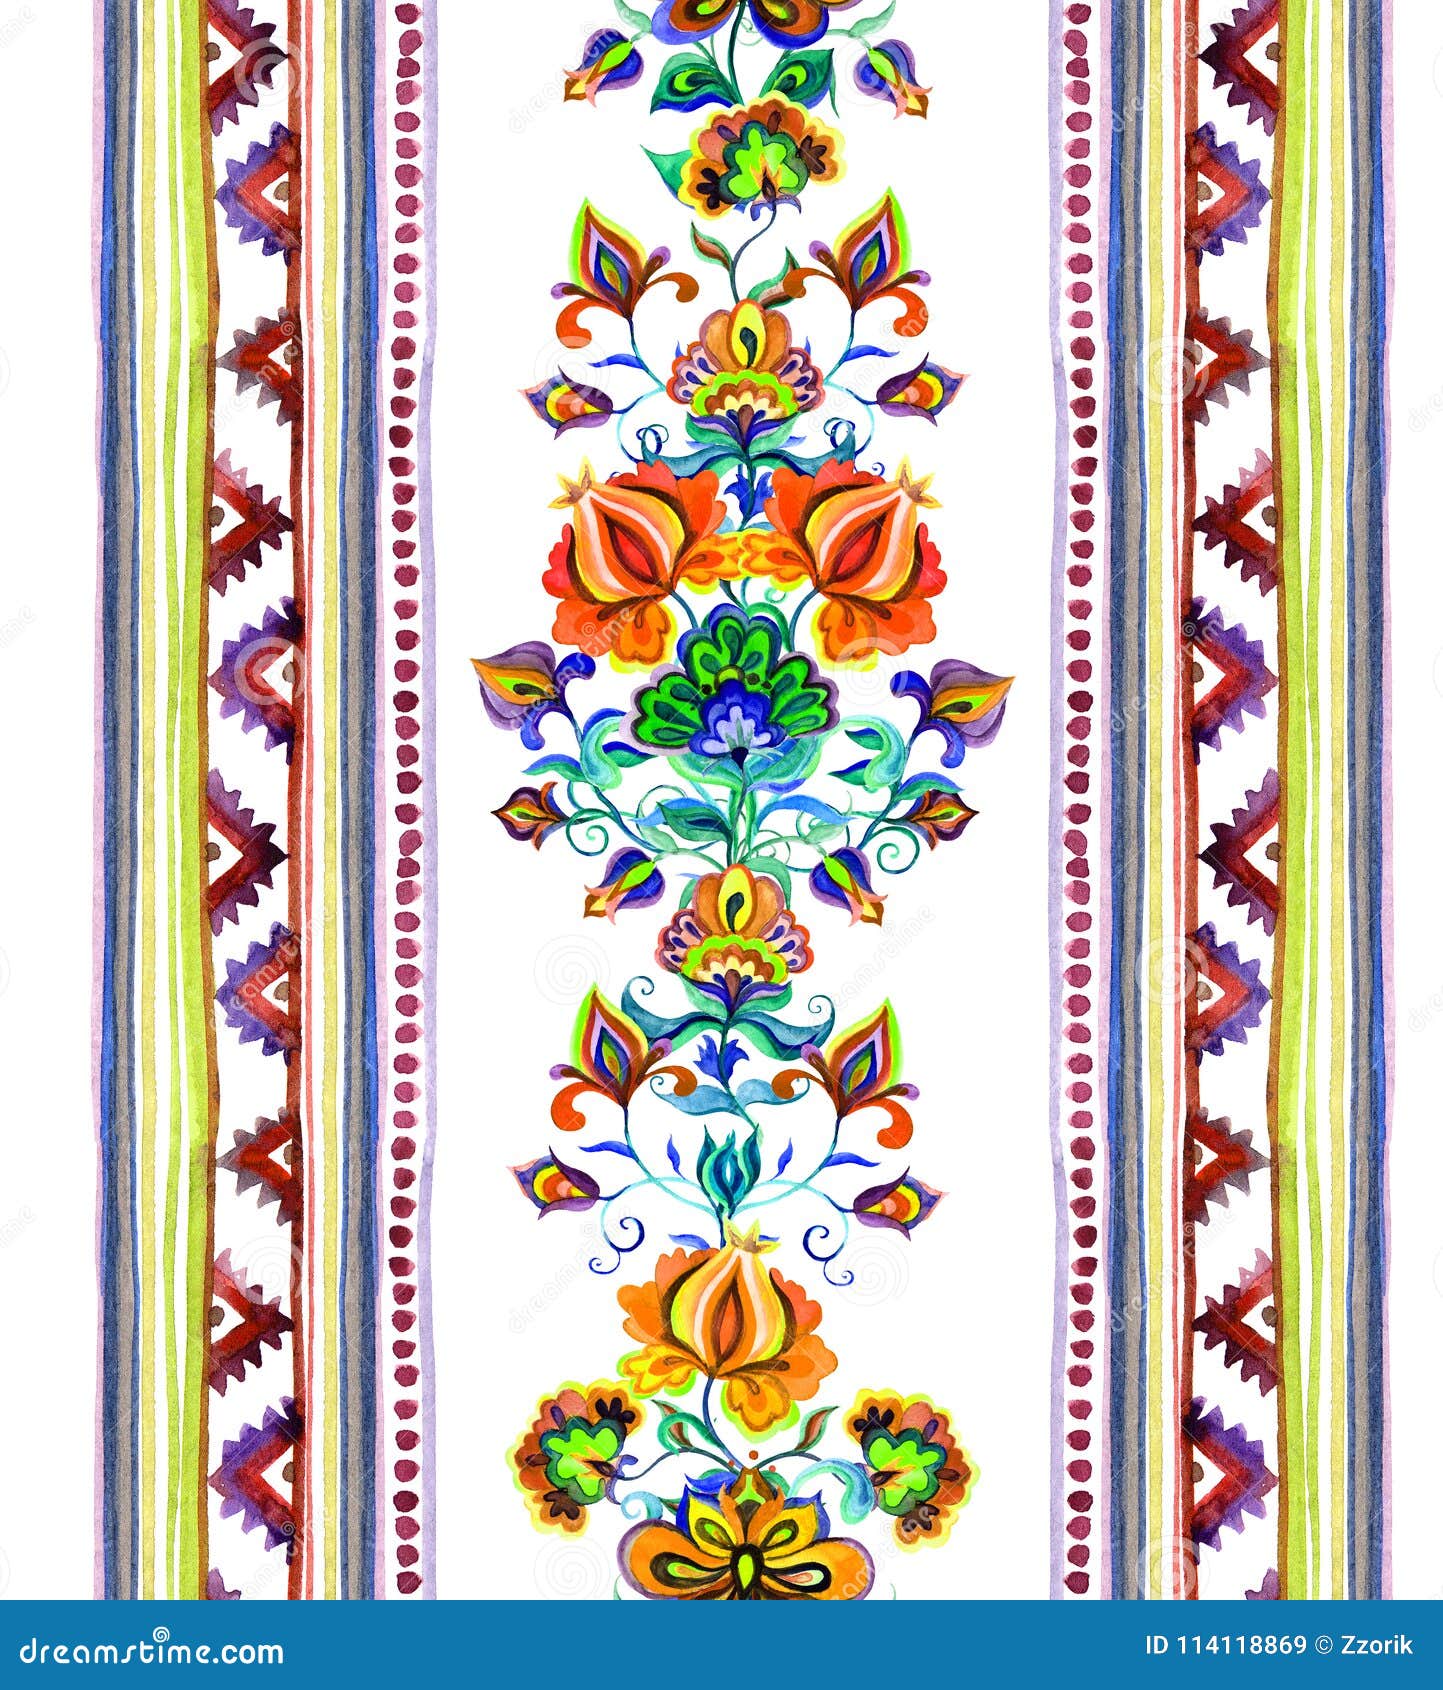 hand crafted ethnic art of eastern europe - seamless frame with ornamental flowers and stripes. watercolor